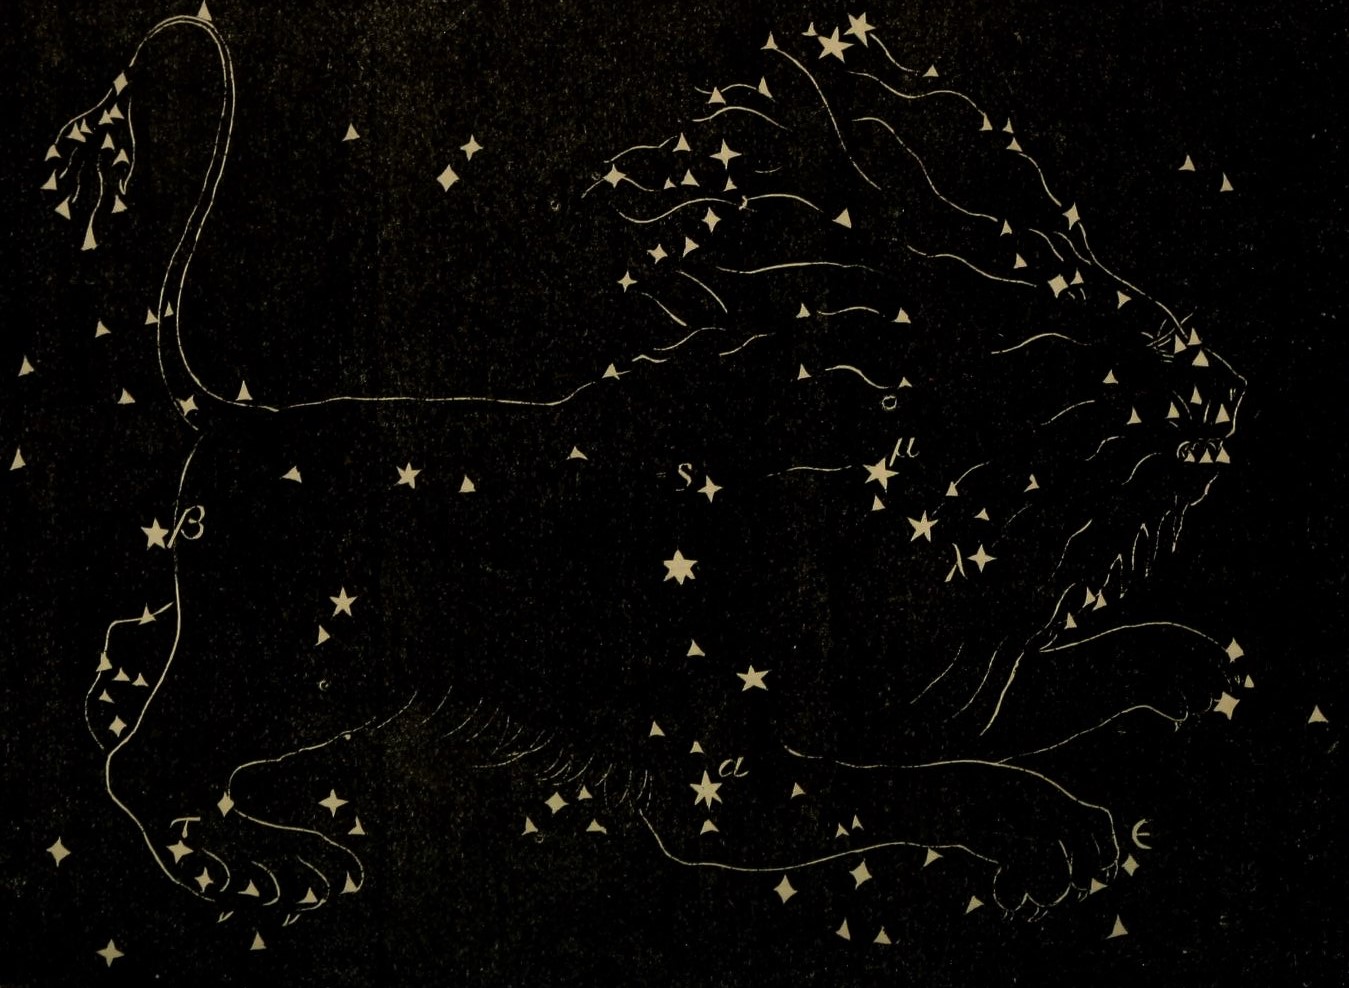 The Original Constellation of the Lion Flowers of the Sky by Richard A. Proctor (1879)